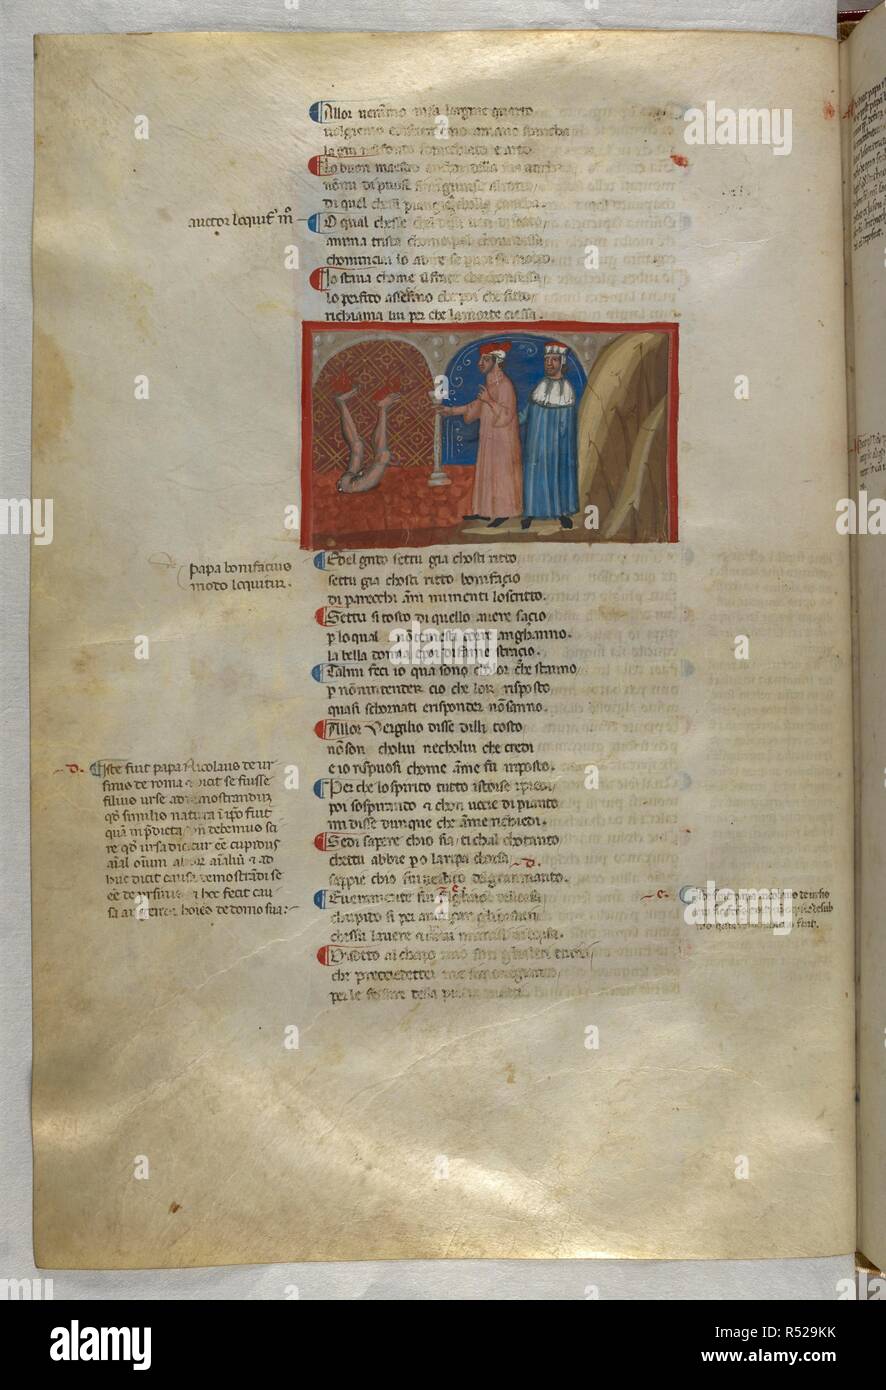 Inferno: Pope Clement V punished for simony. Dante Alighieri, Divina Commedia ( The Divine Comedy ), with a commentary in Latin. 1st half of the 14th century. Source: Egerton 943, f.34v. Language: Italian, Latin. Stock Photo